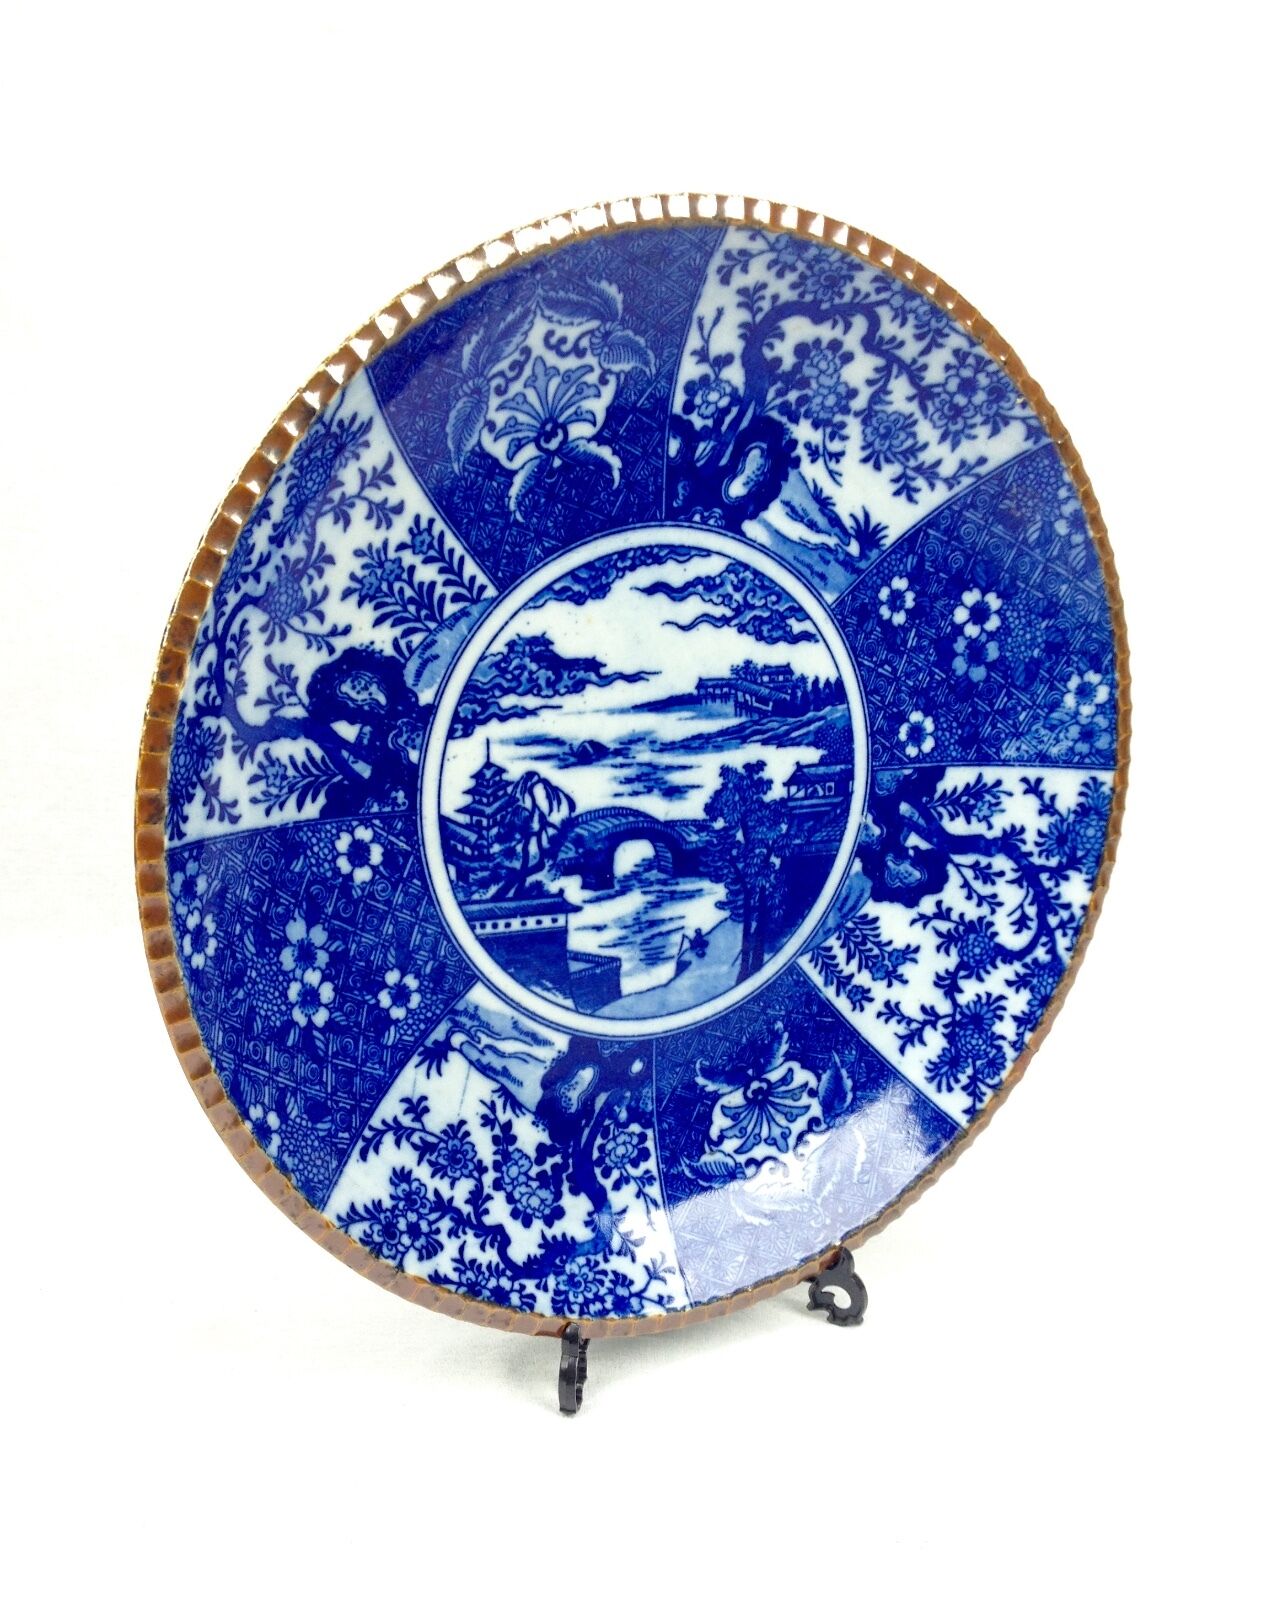 Antique Chinese Charger Plate / Blue And White Chinaware Large